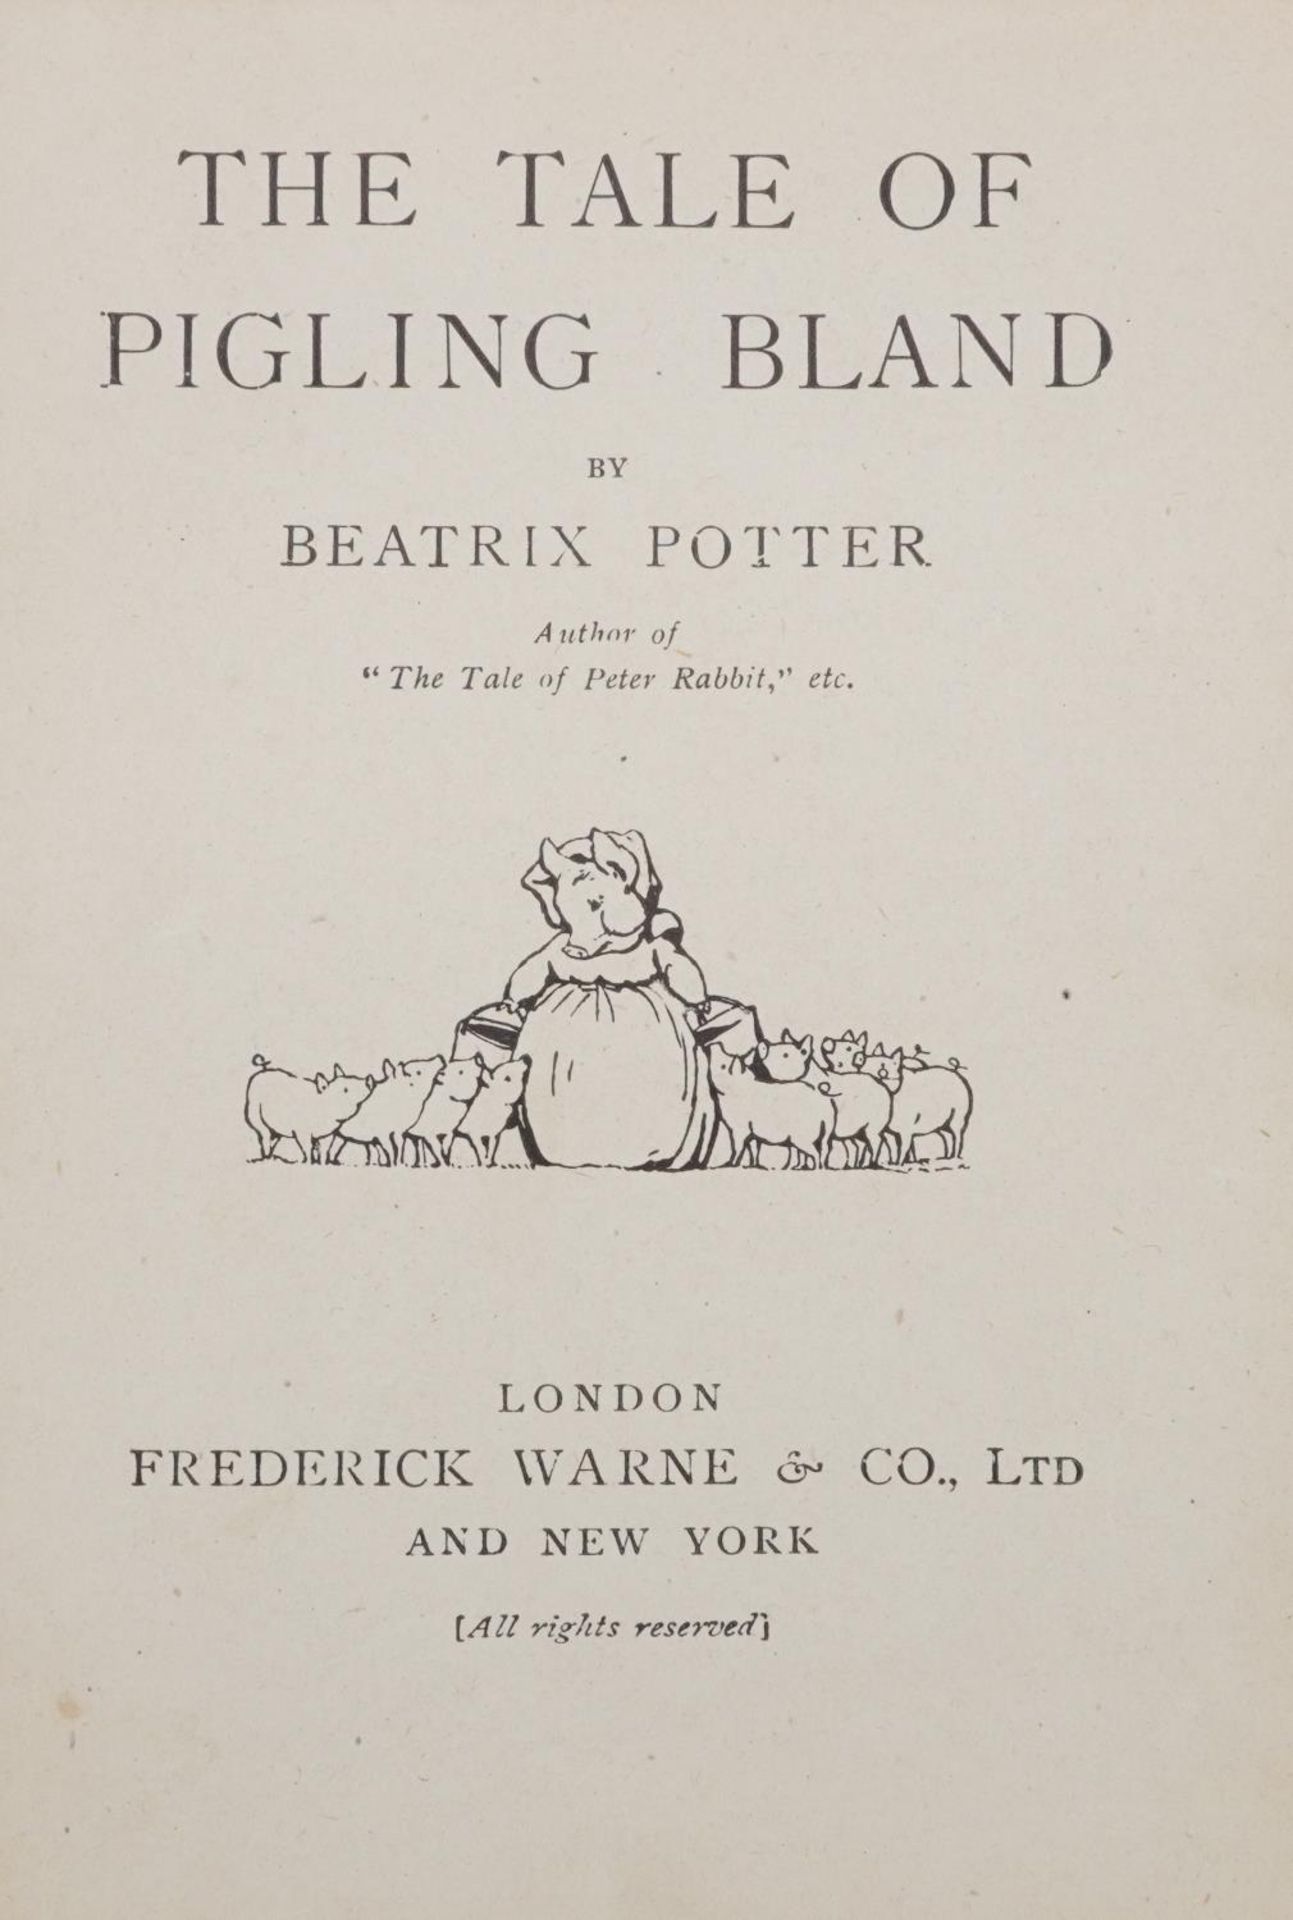 The Tale of Pigling Bland, hardback book by Beatrix Potter published London Frederick Warne & Co, - Image 2 of 4